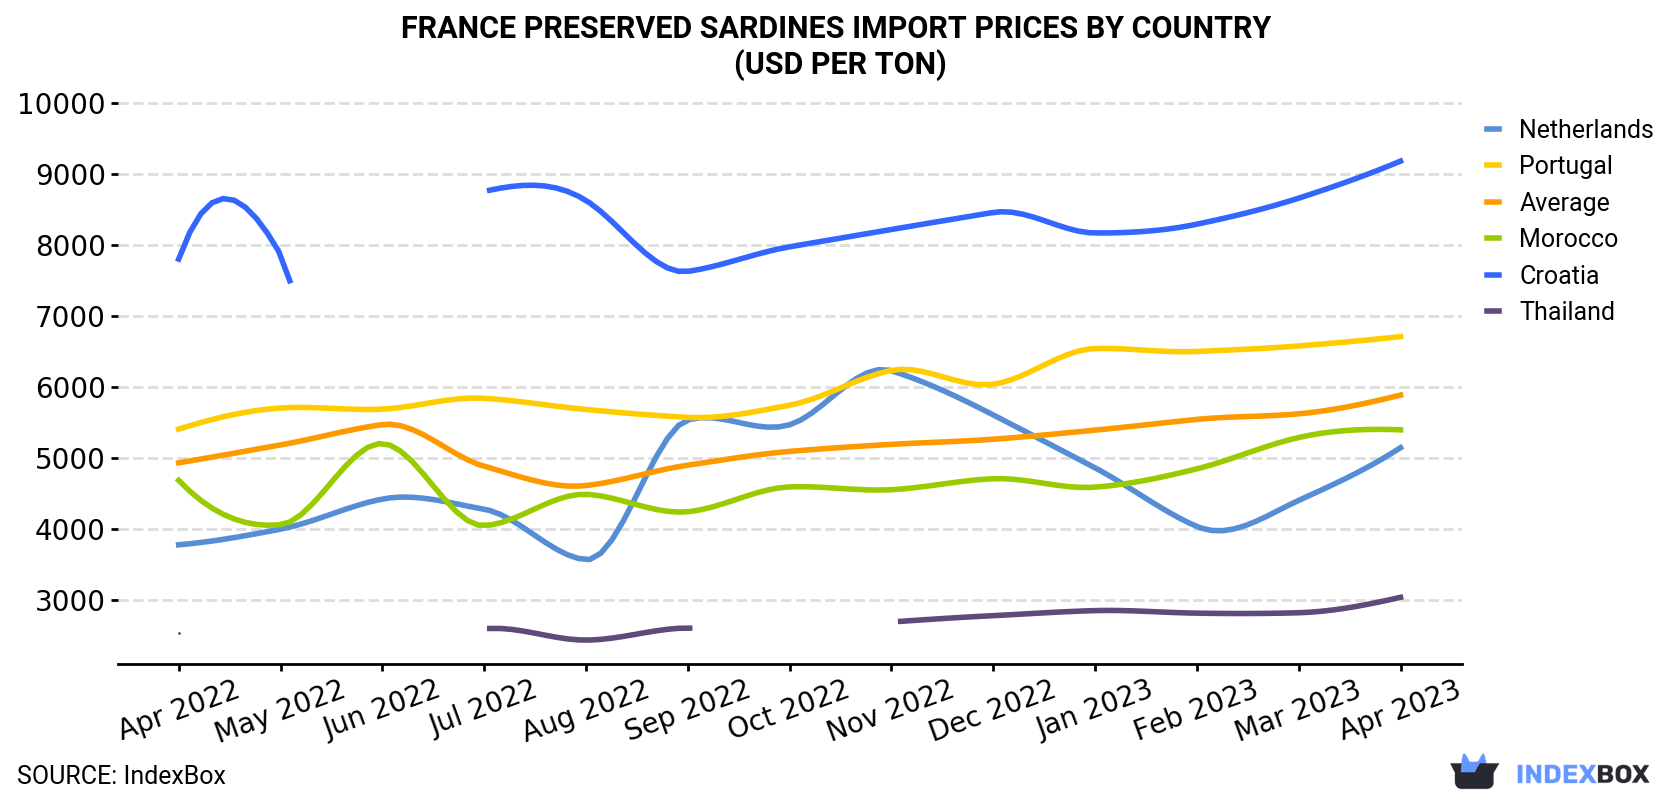 France Preserved Sardines Import Prices By Country (USD Per Ton)